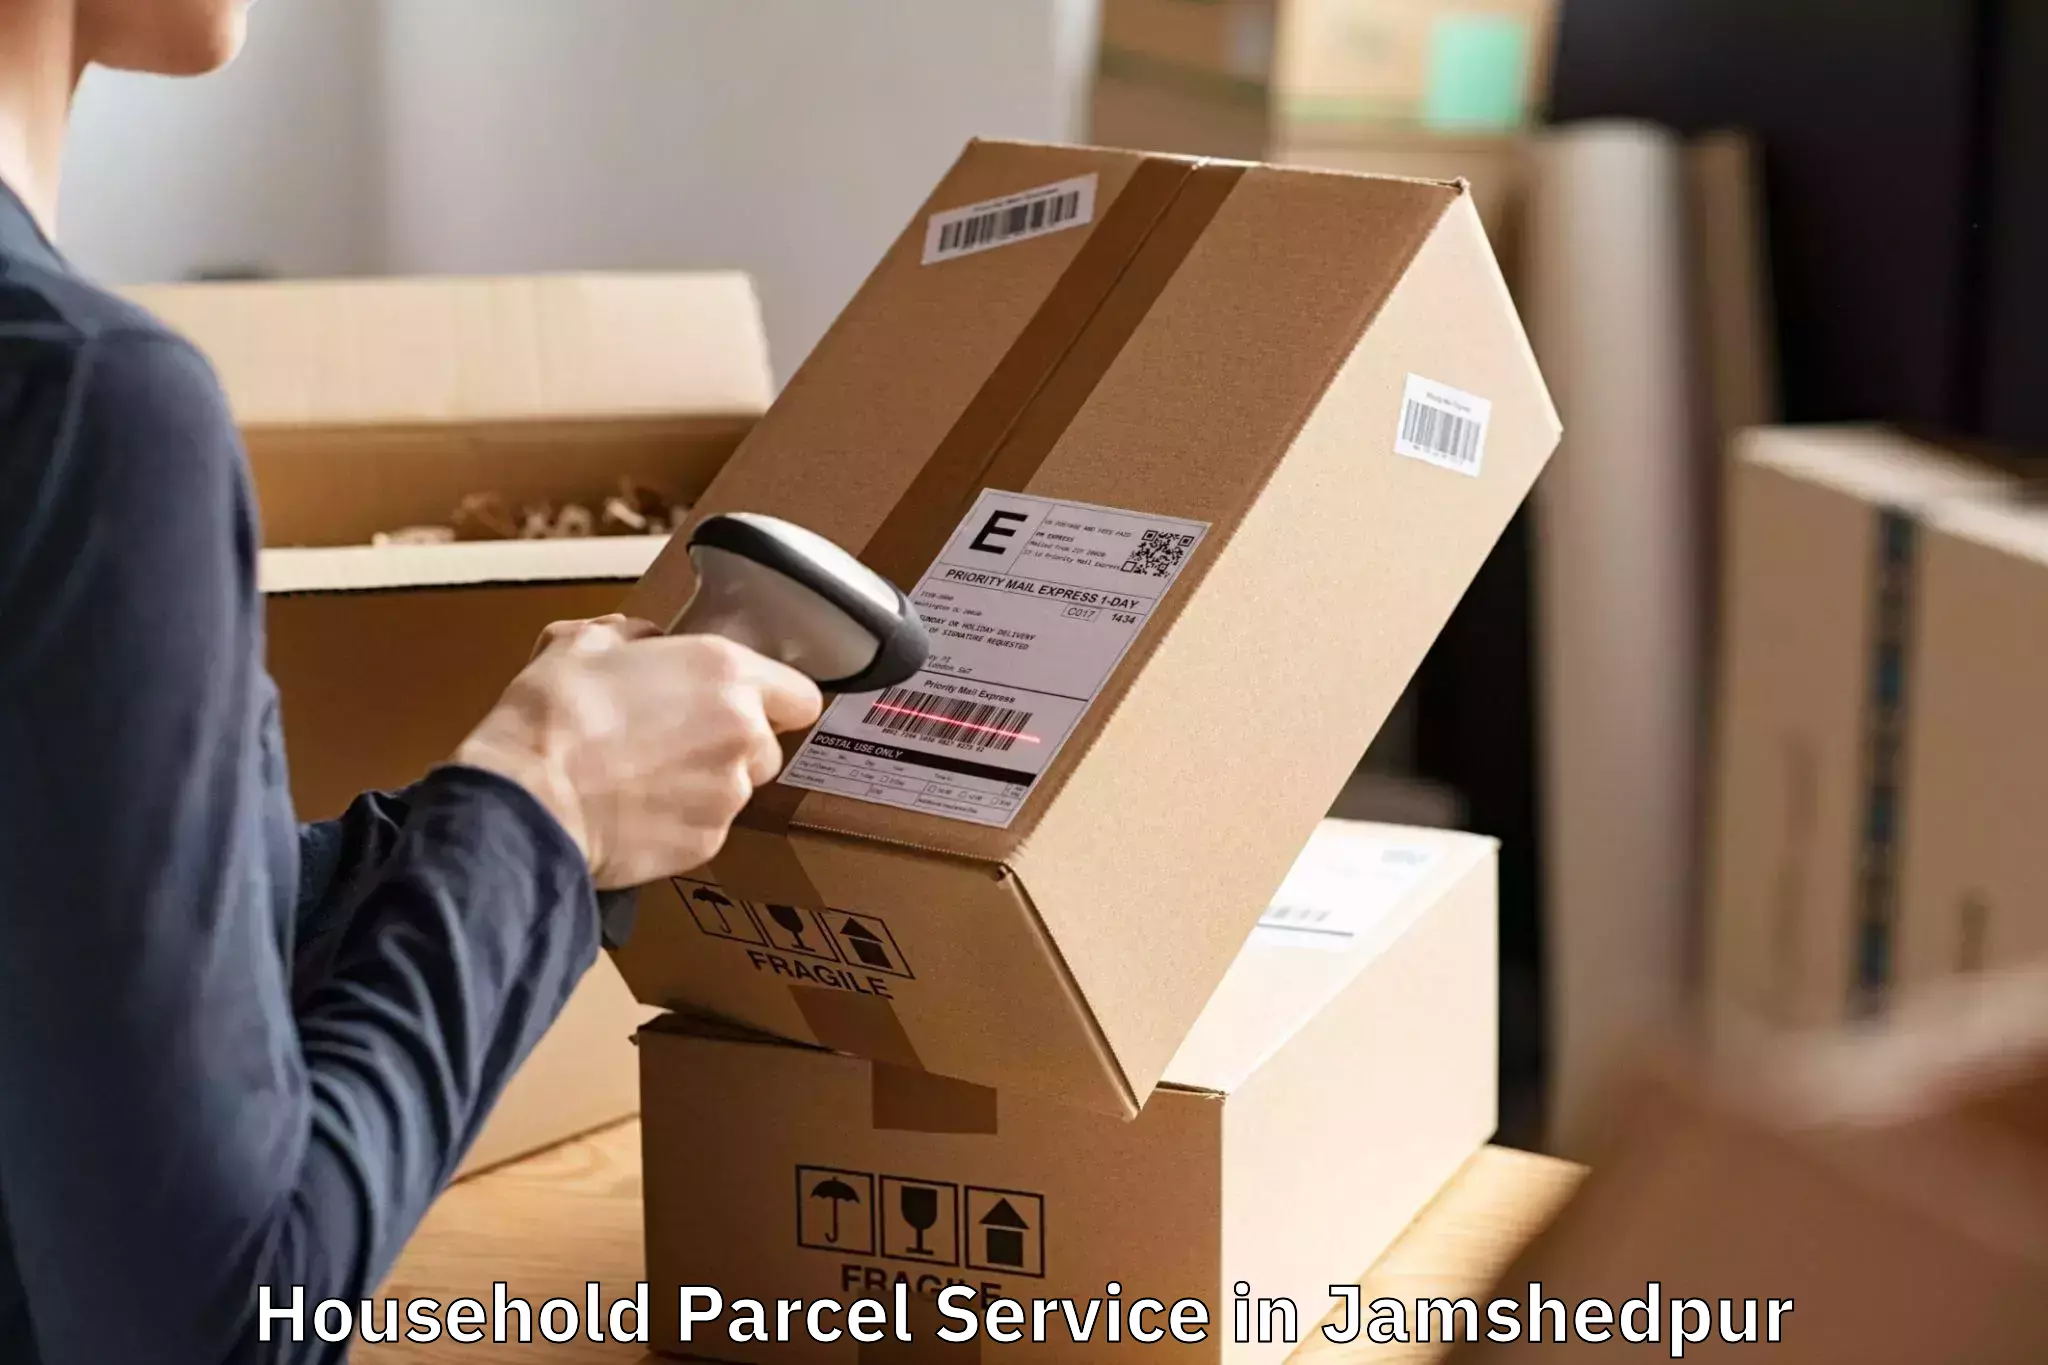 Trusted Household Parcel Service in Jamshedpur, Jharkhand (JH)